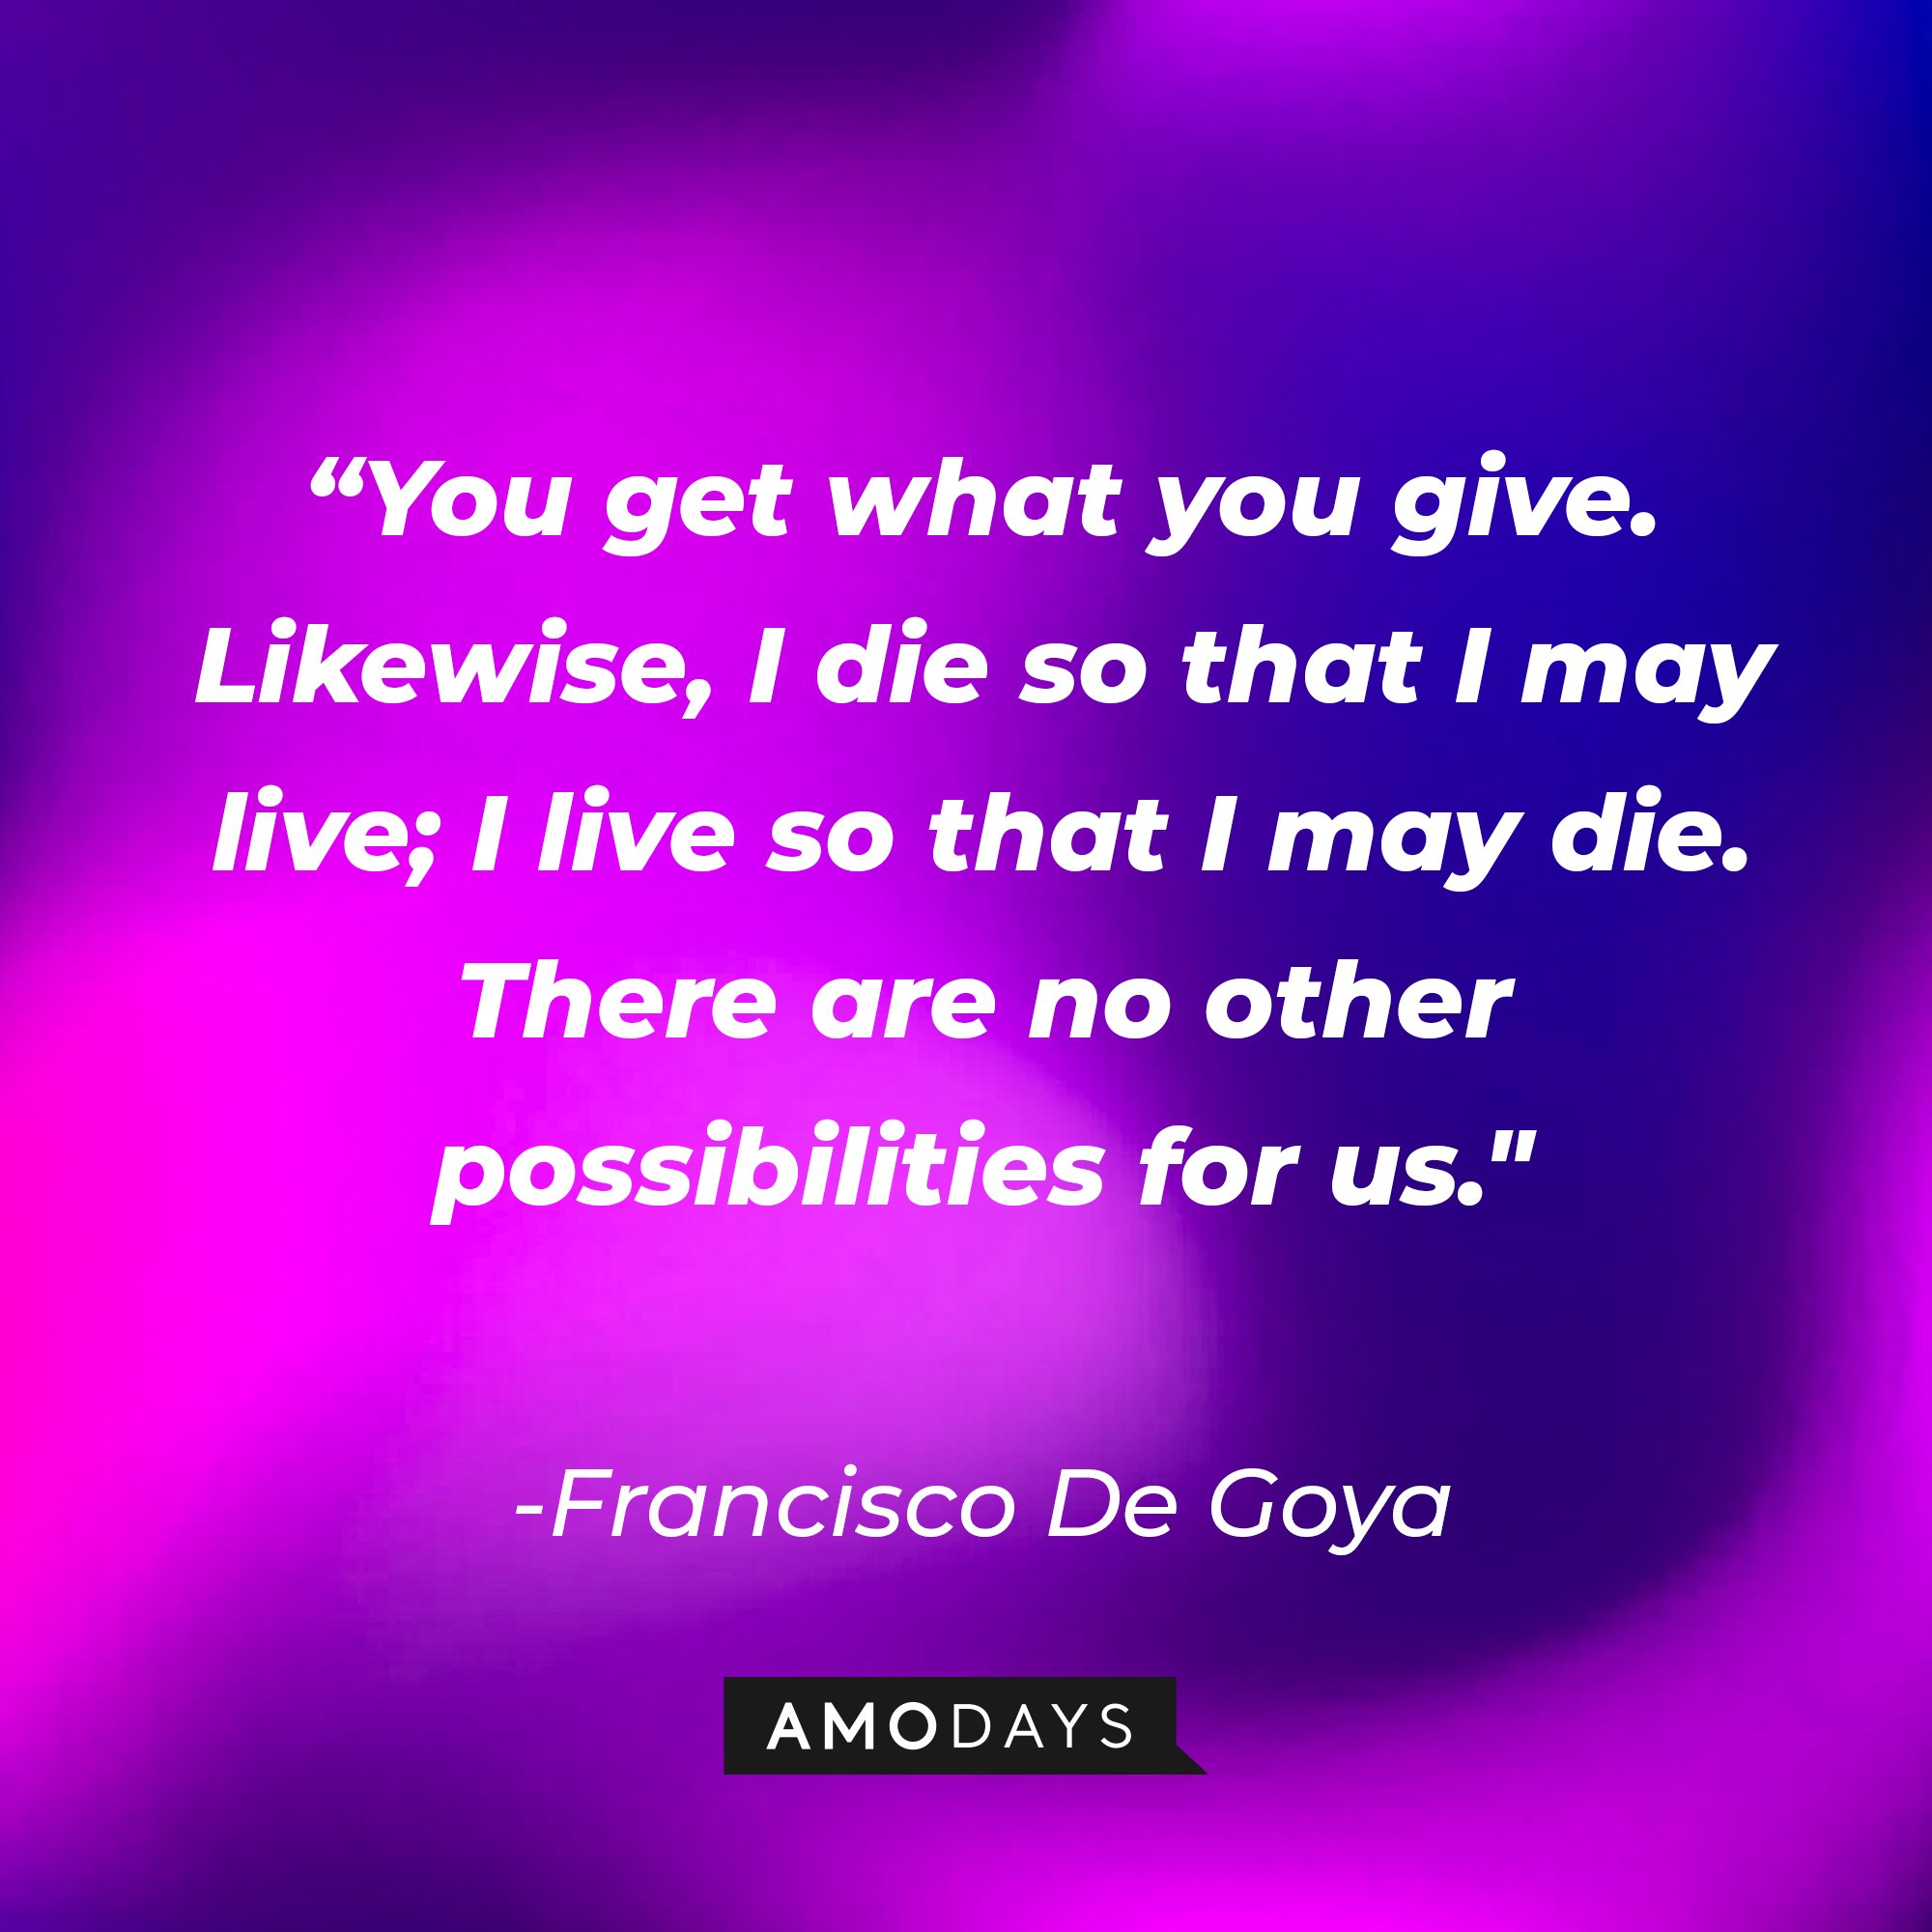 Francisco De Goya’s quote: “You get what you give. Likewise, I die so that I may live; I live so that I may die. There are no other possibilities for us." | Image: AmoDays